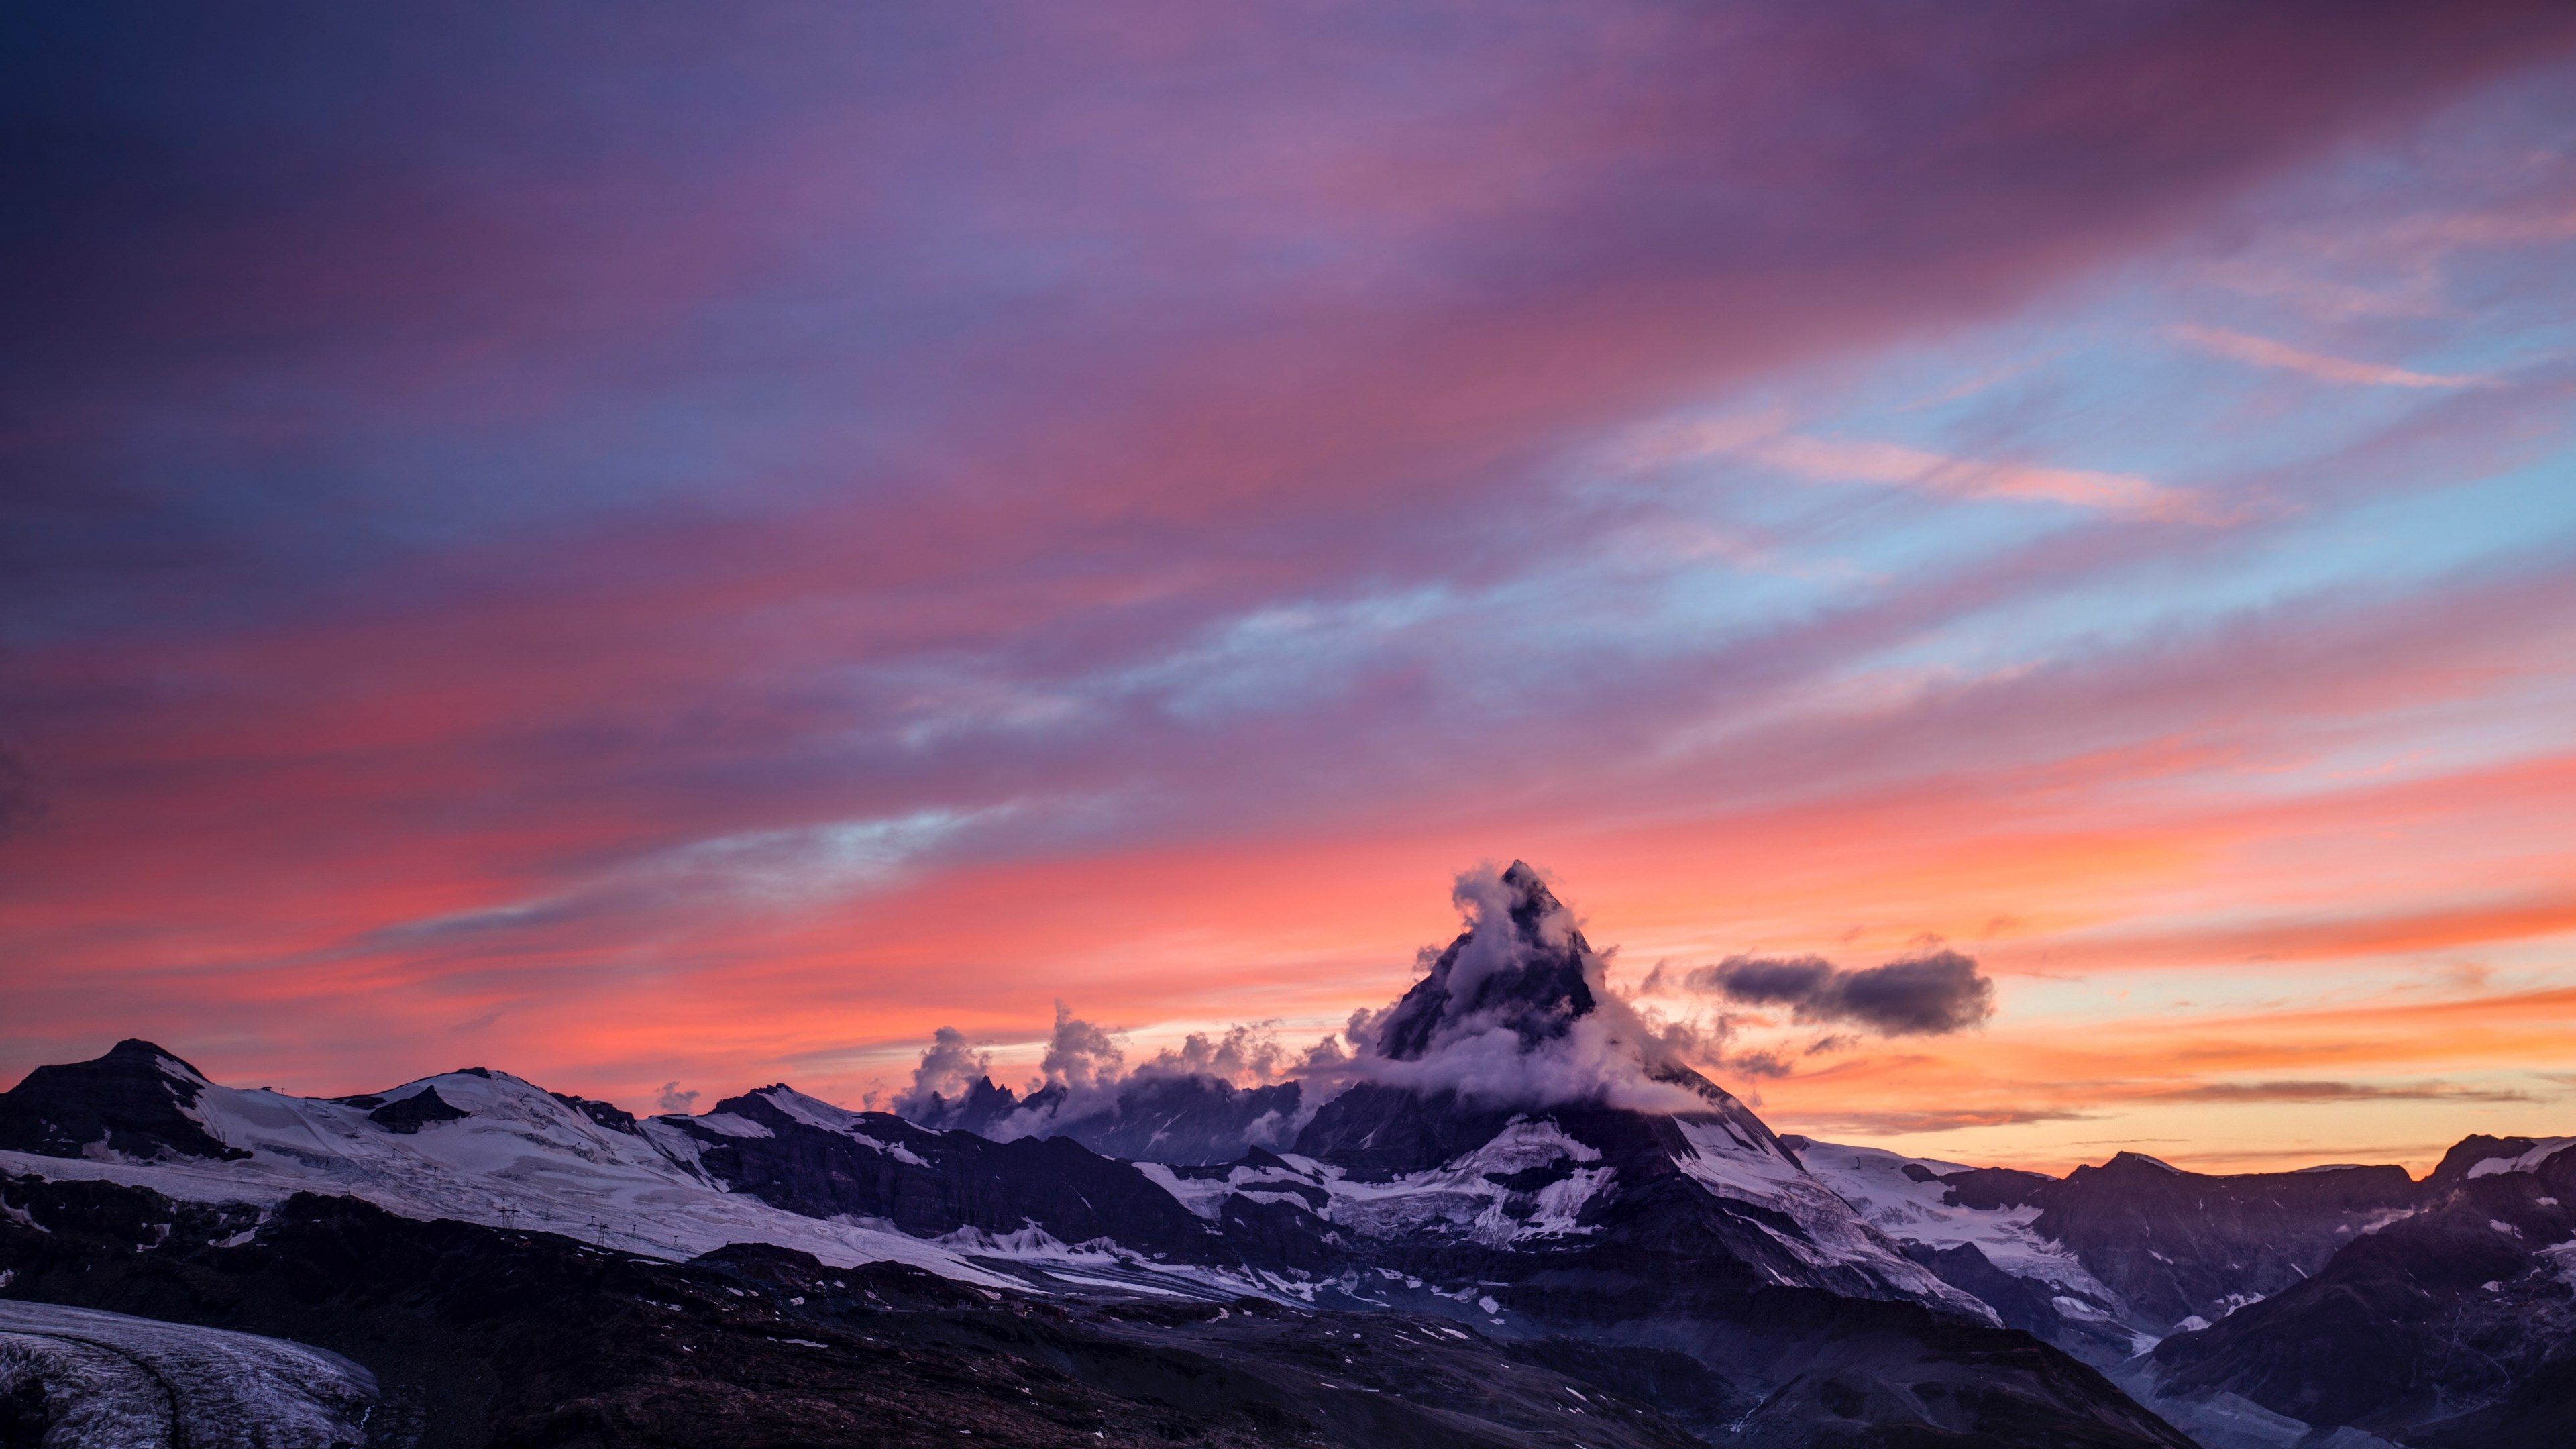 Wallpaper / the sun setting over the snow capped matterhorn mountain with a blue and orange skyline, sunset over matterhorn 4k wallpaper